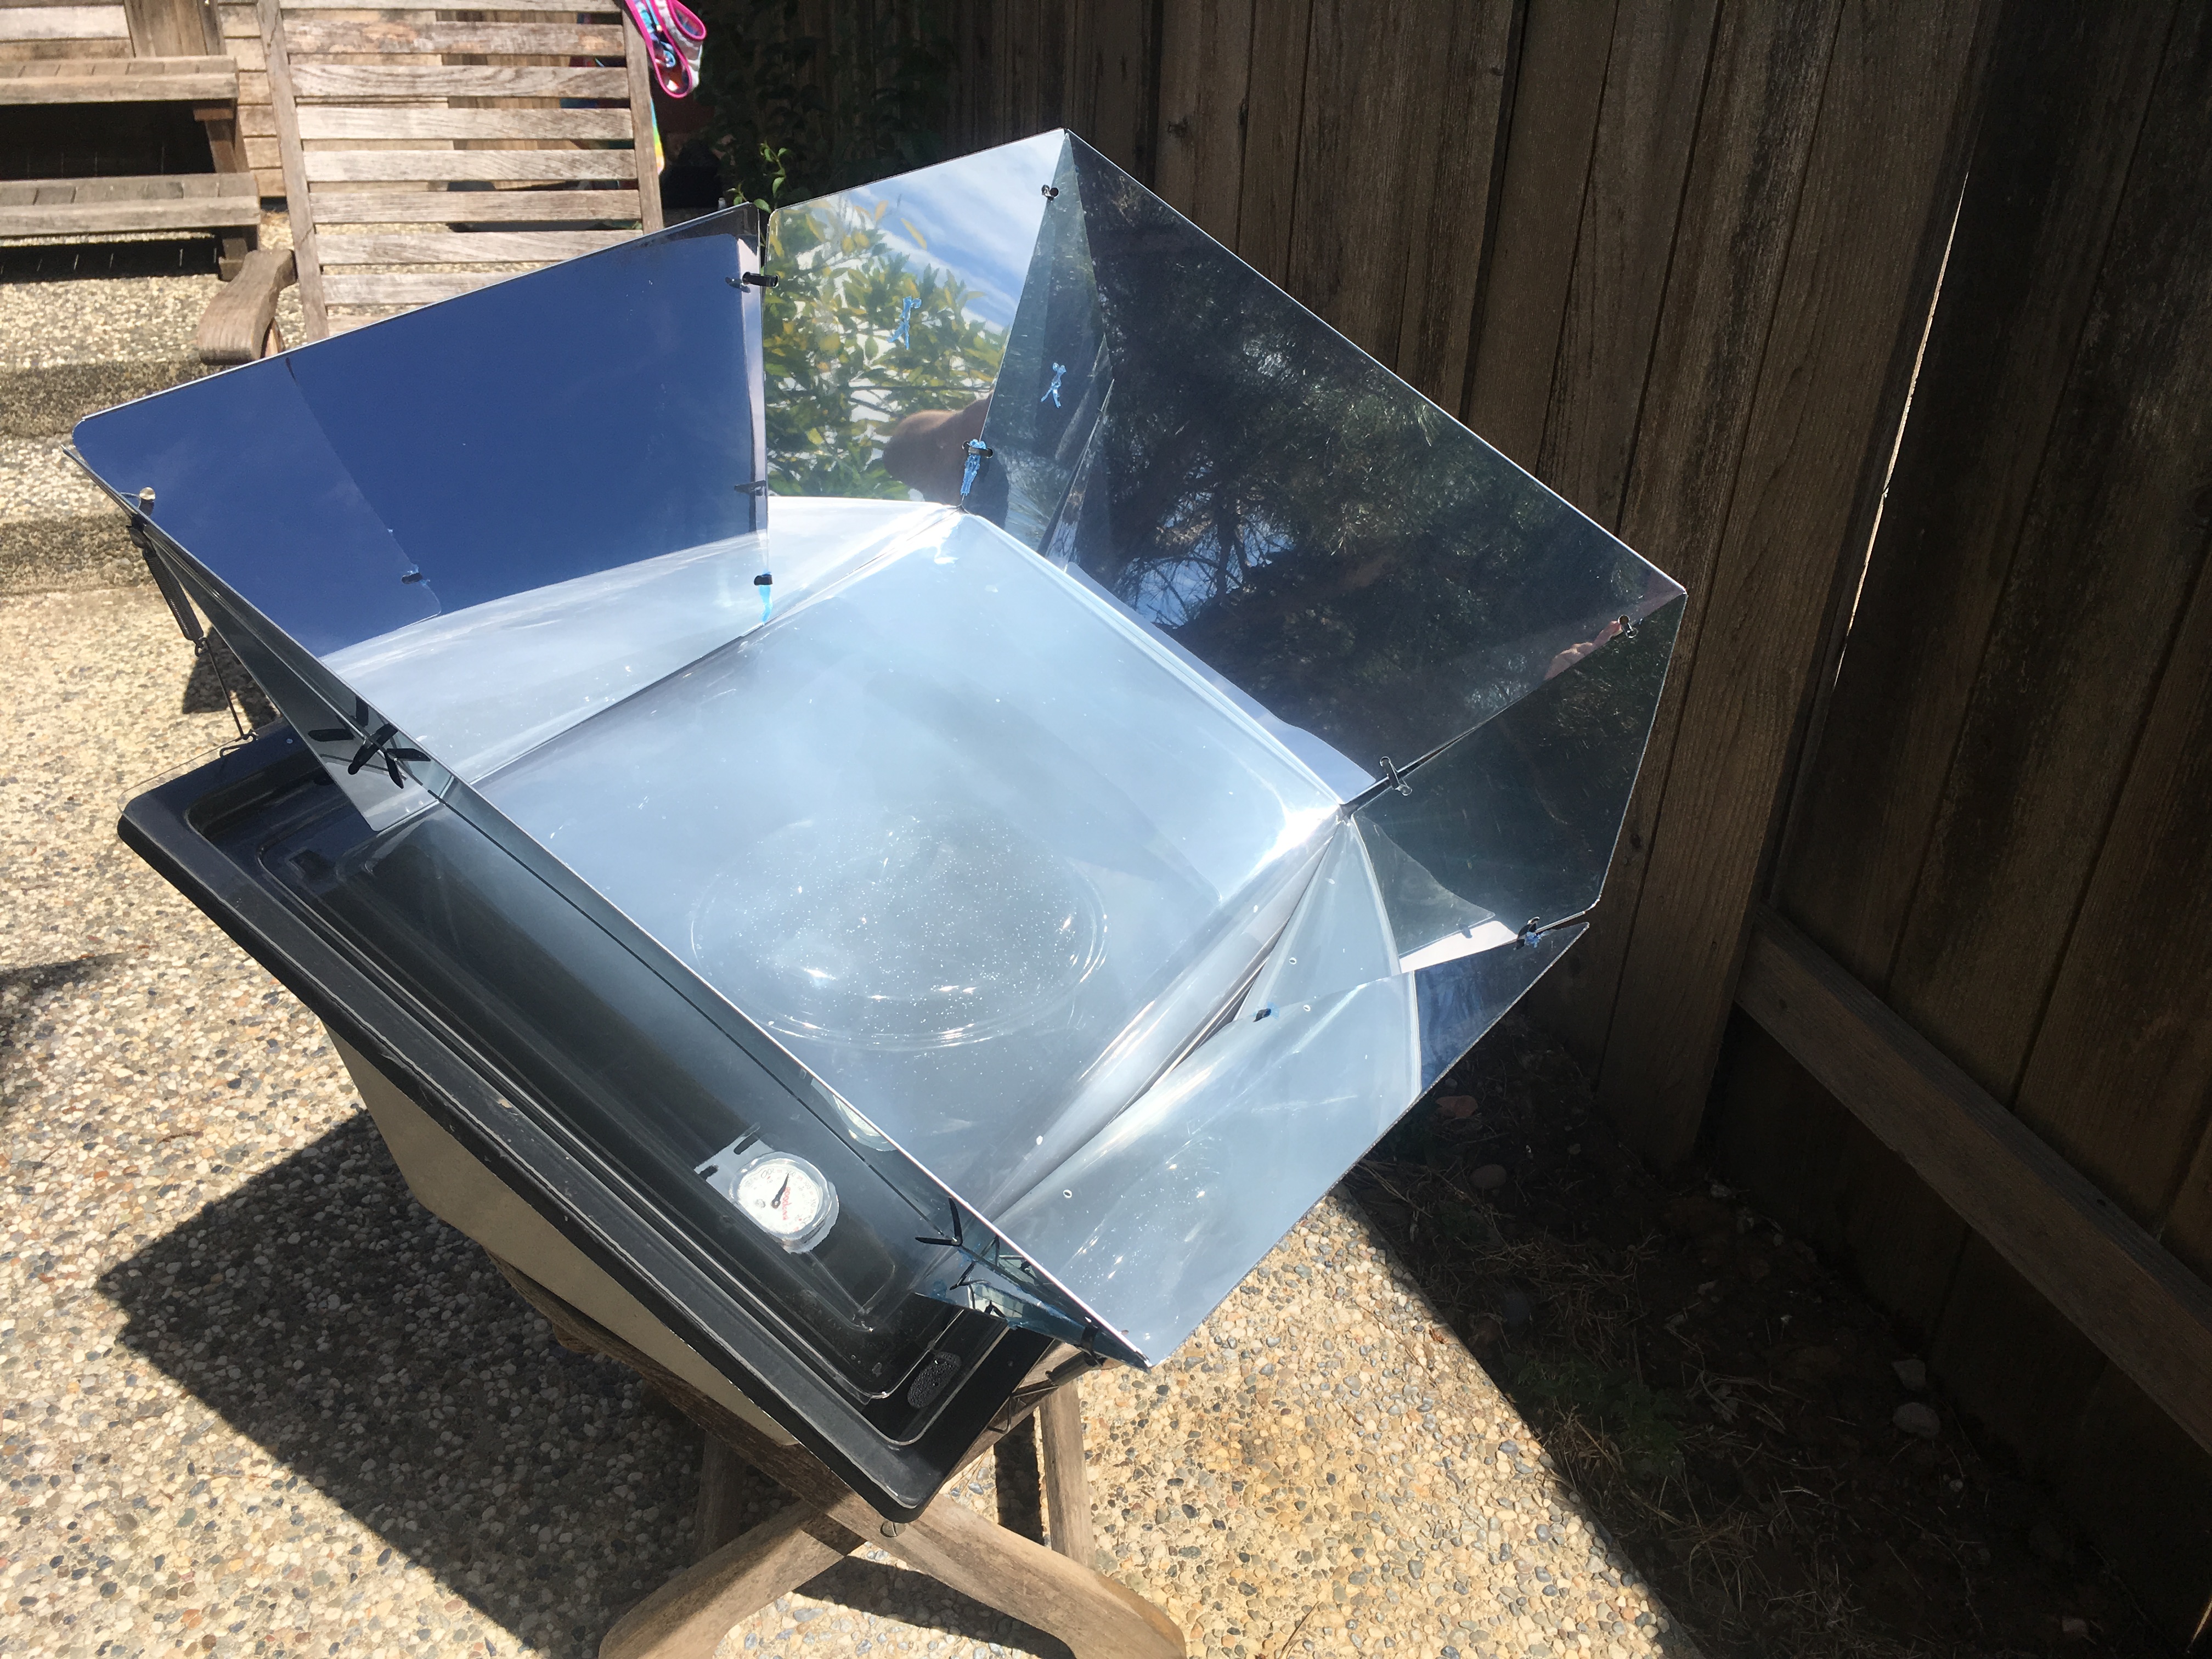 Every Tiny House Should Have a Solar Oven